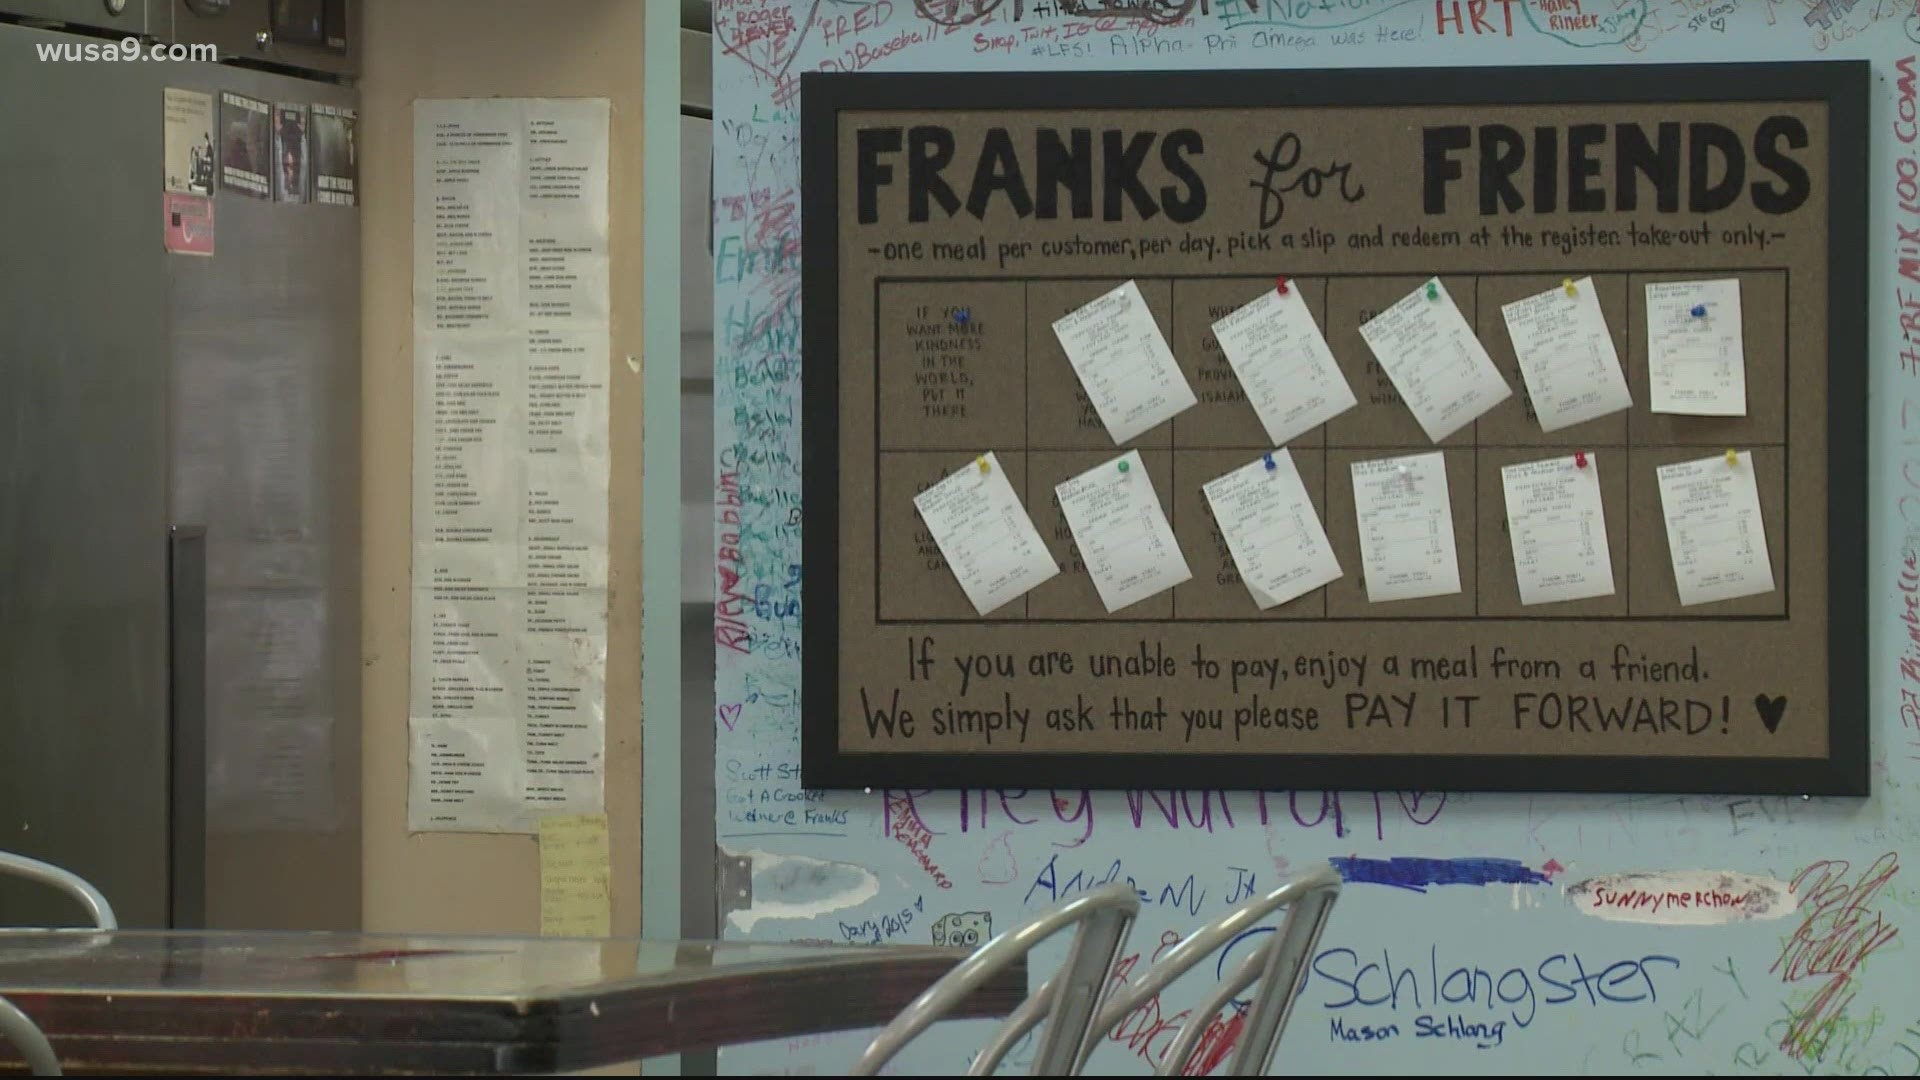 Perfectly Frank is spreading kindness one receipt at a time.